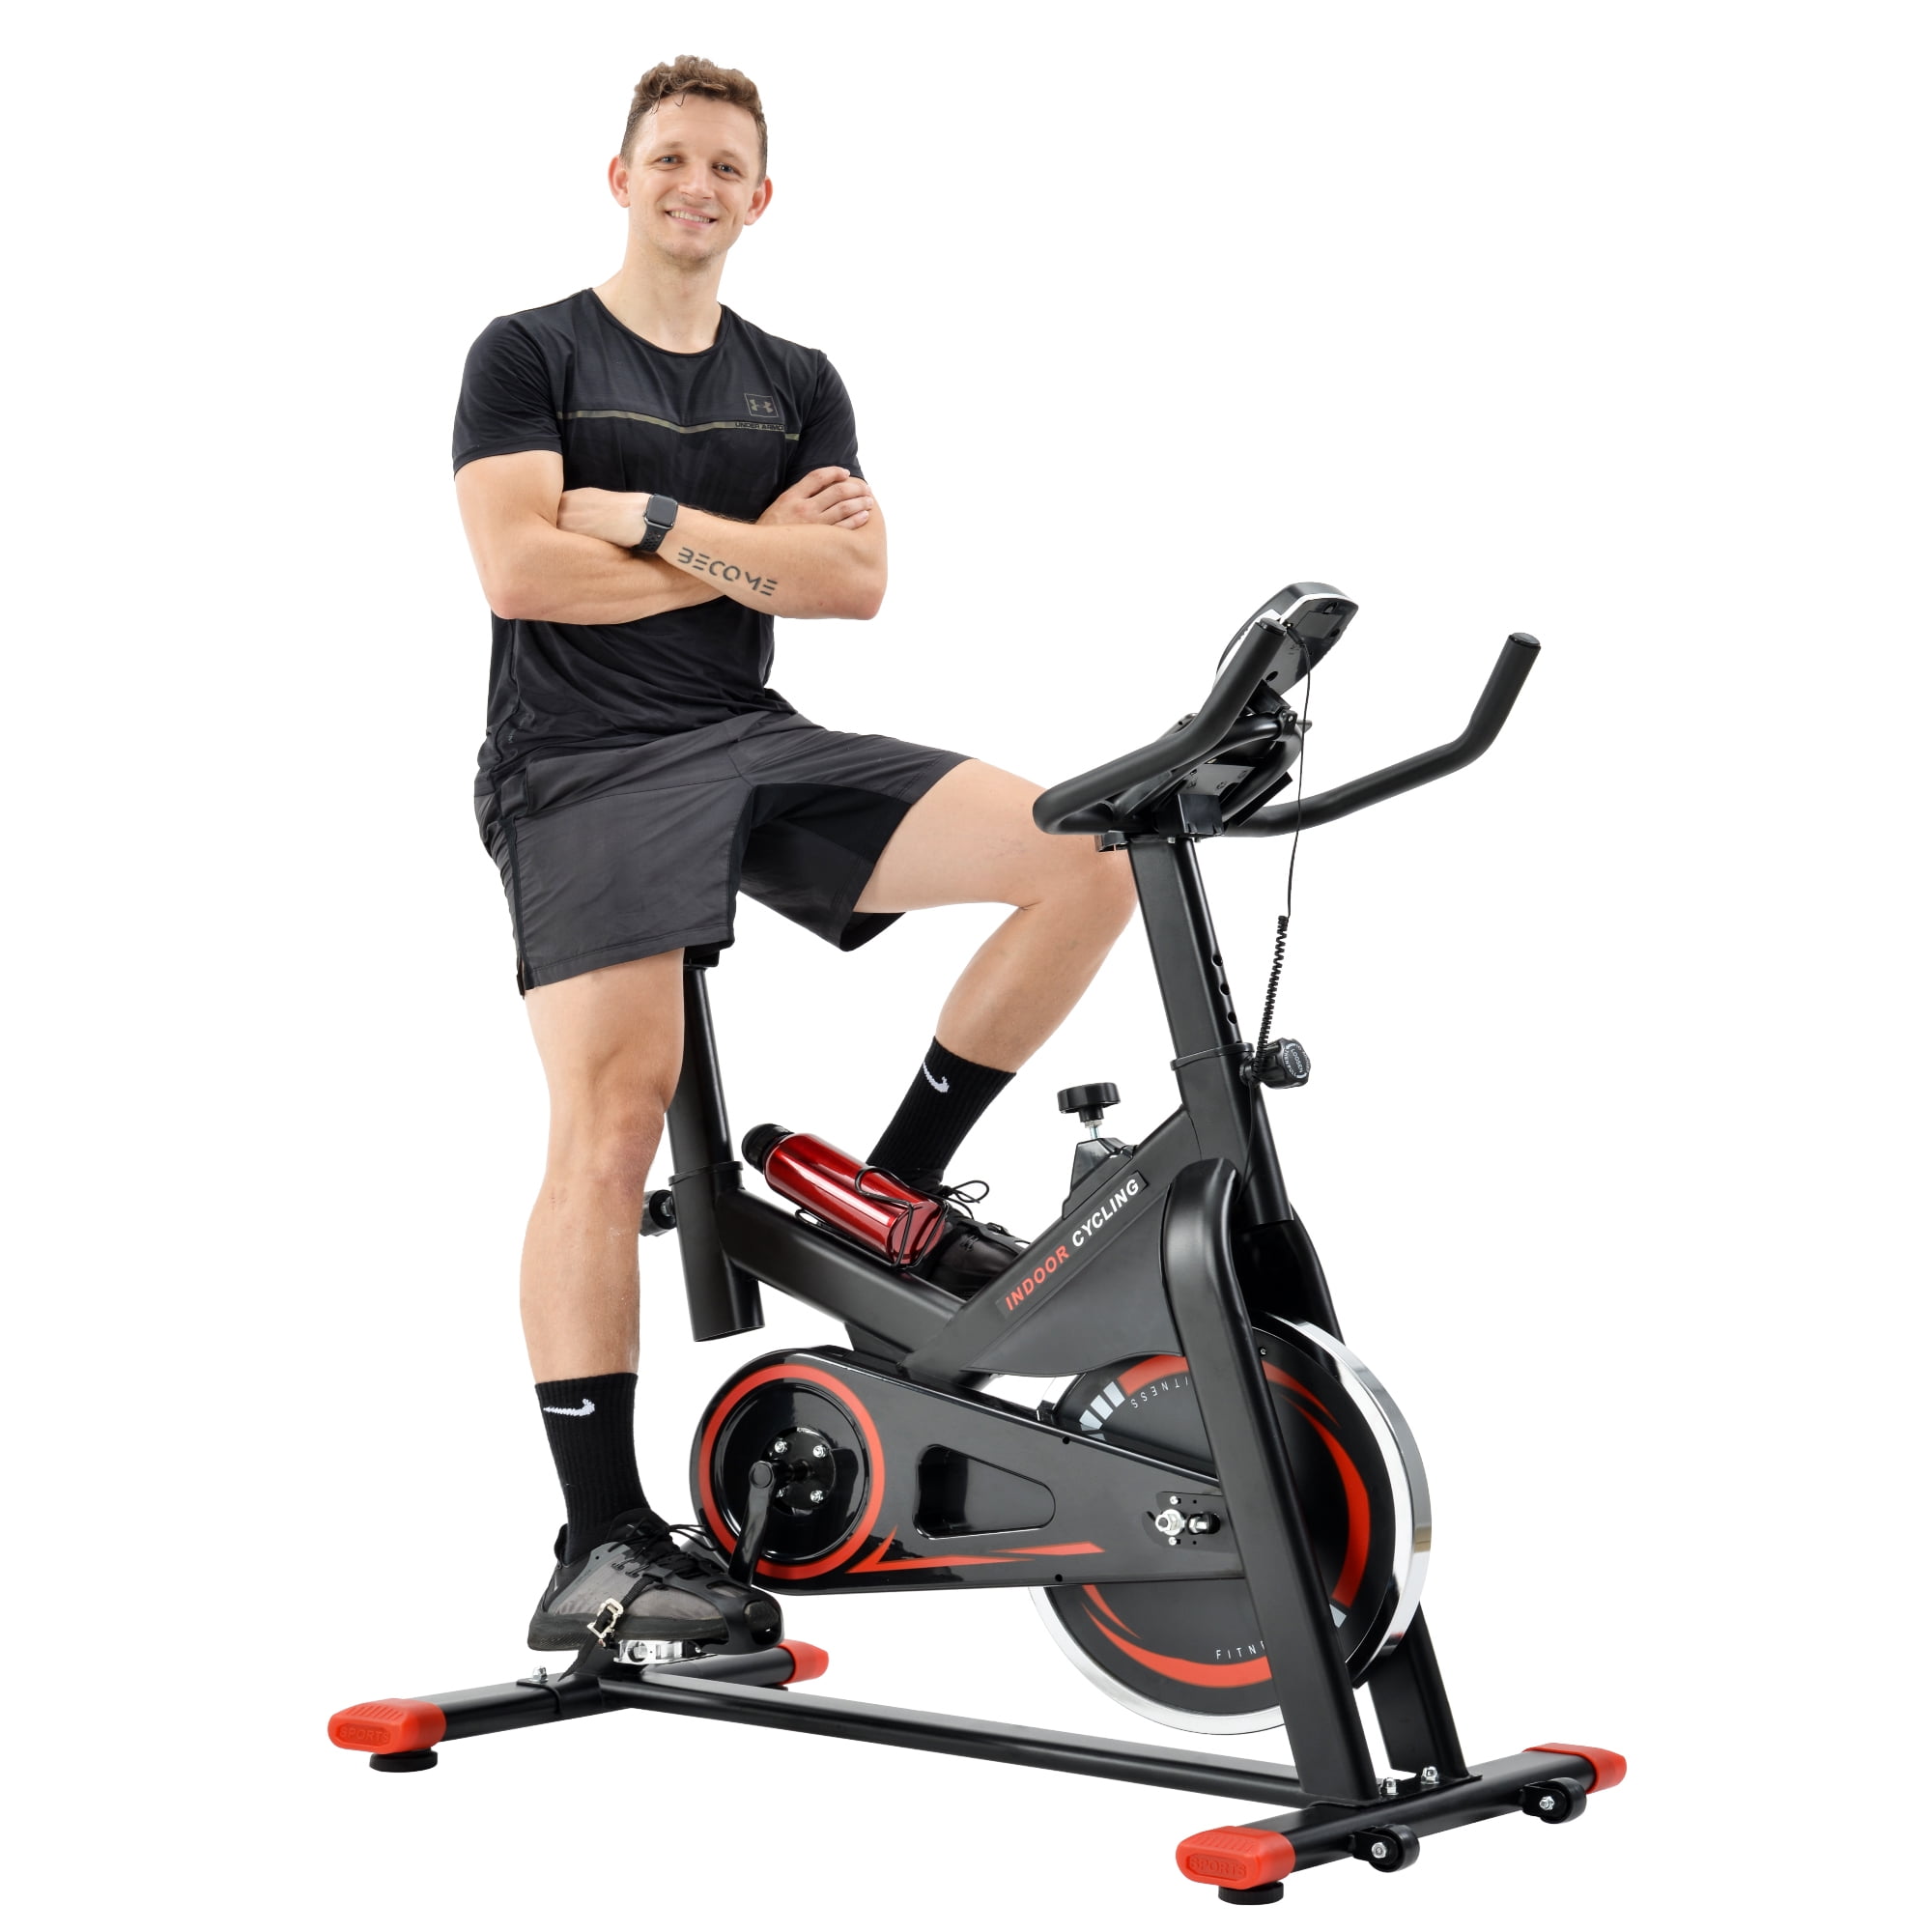 SWAOOS Folding electromagnetic exercise bike home exercise trainers and stationary vertical folding trainer,Black indoor fitness equipment